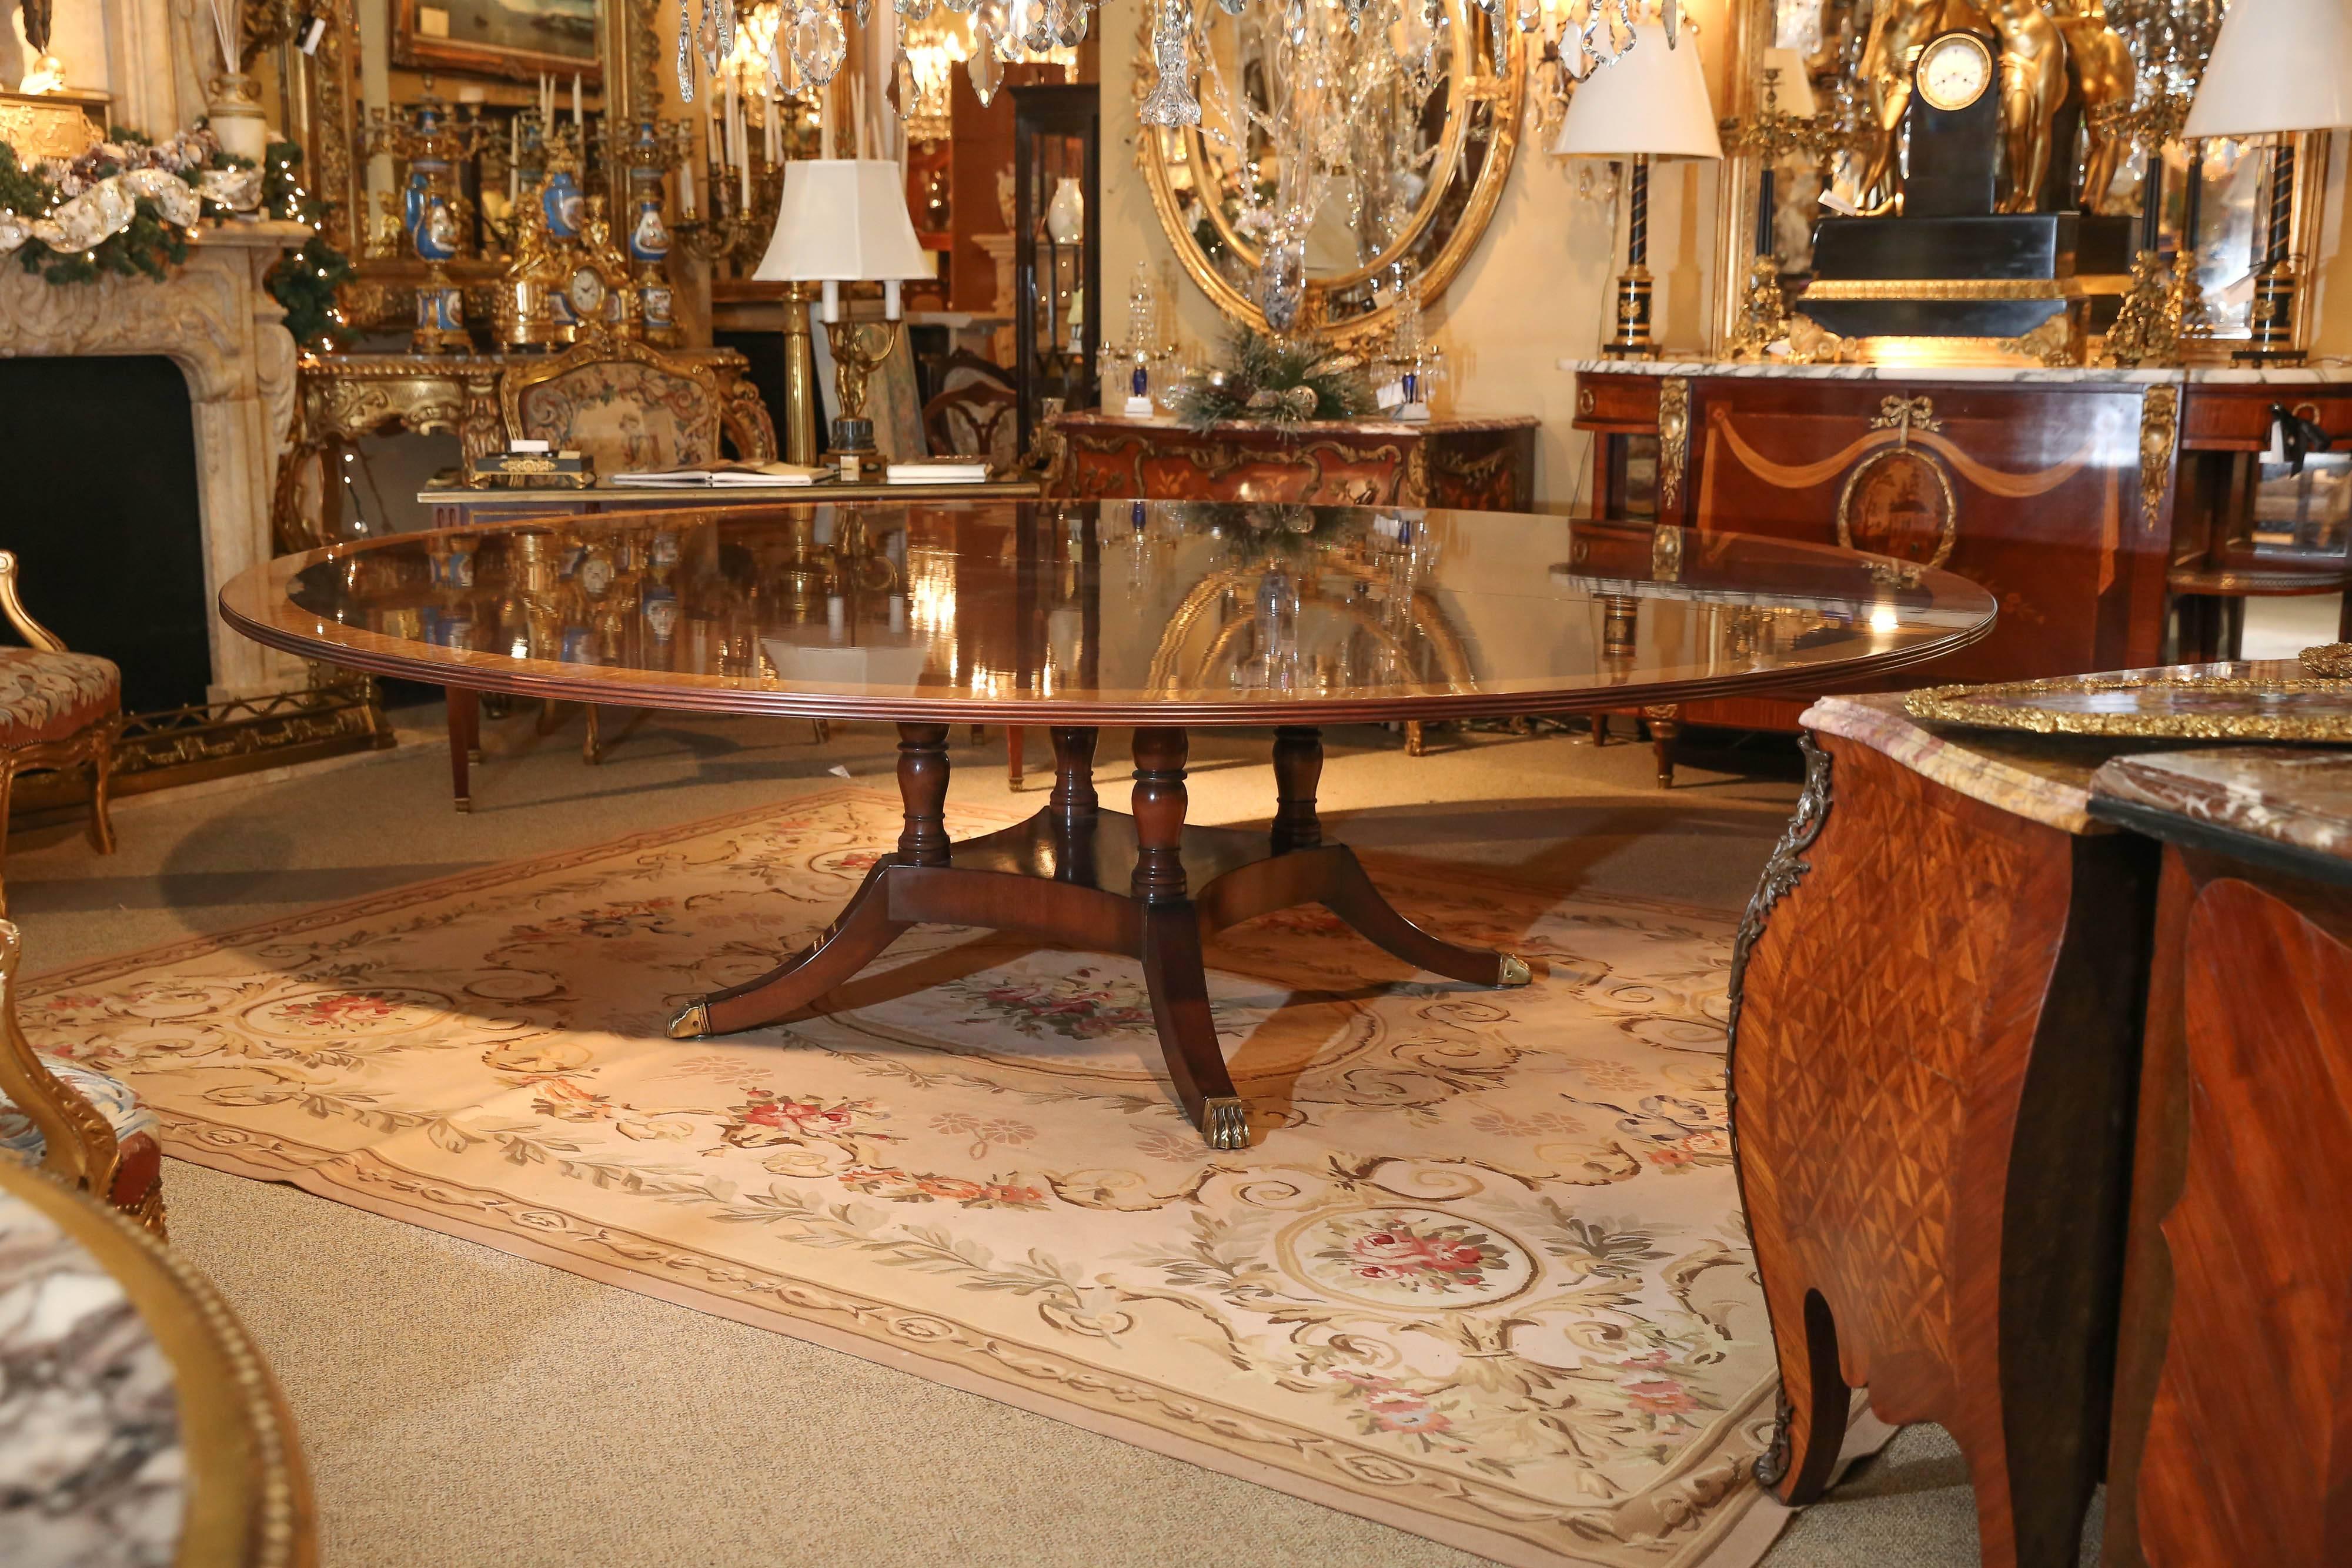 Large mahogany round dining table banded in satinwood
The diameter is 108 inches
It was made by the Kittinger Company